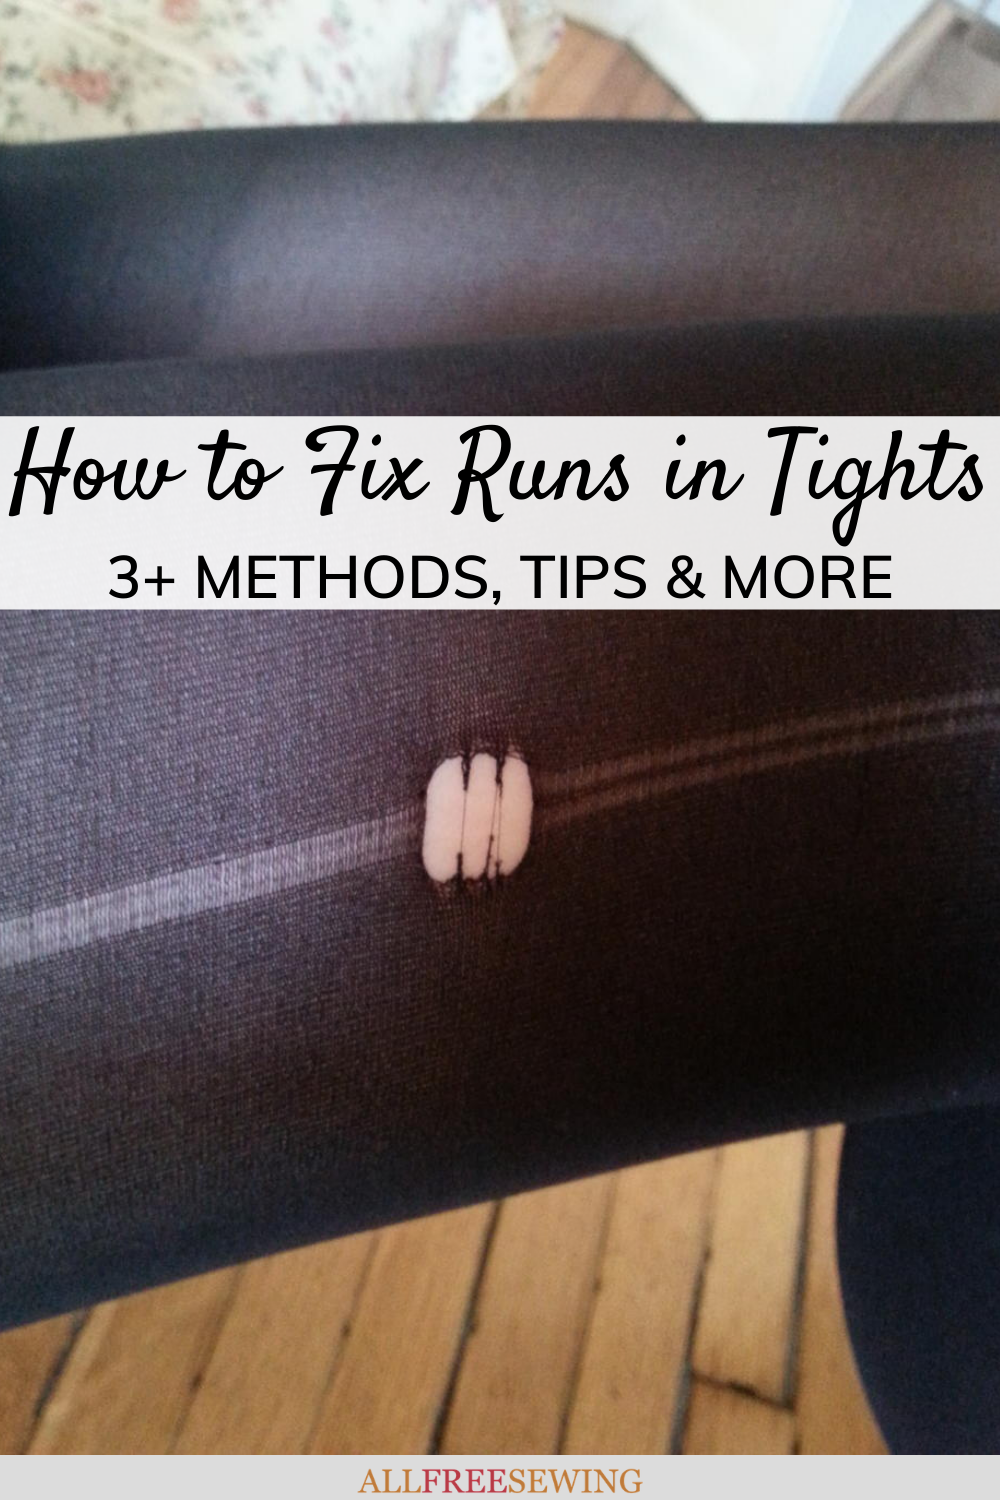 How to Fix Runs in Tights (Sewing Hacks!)